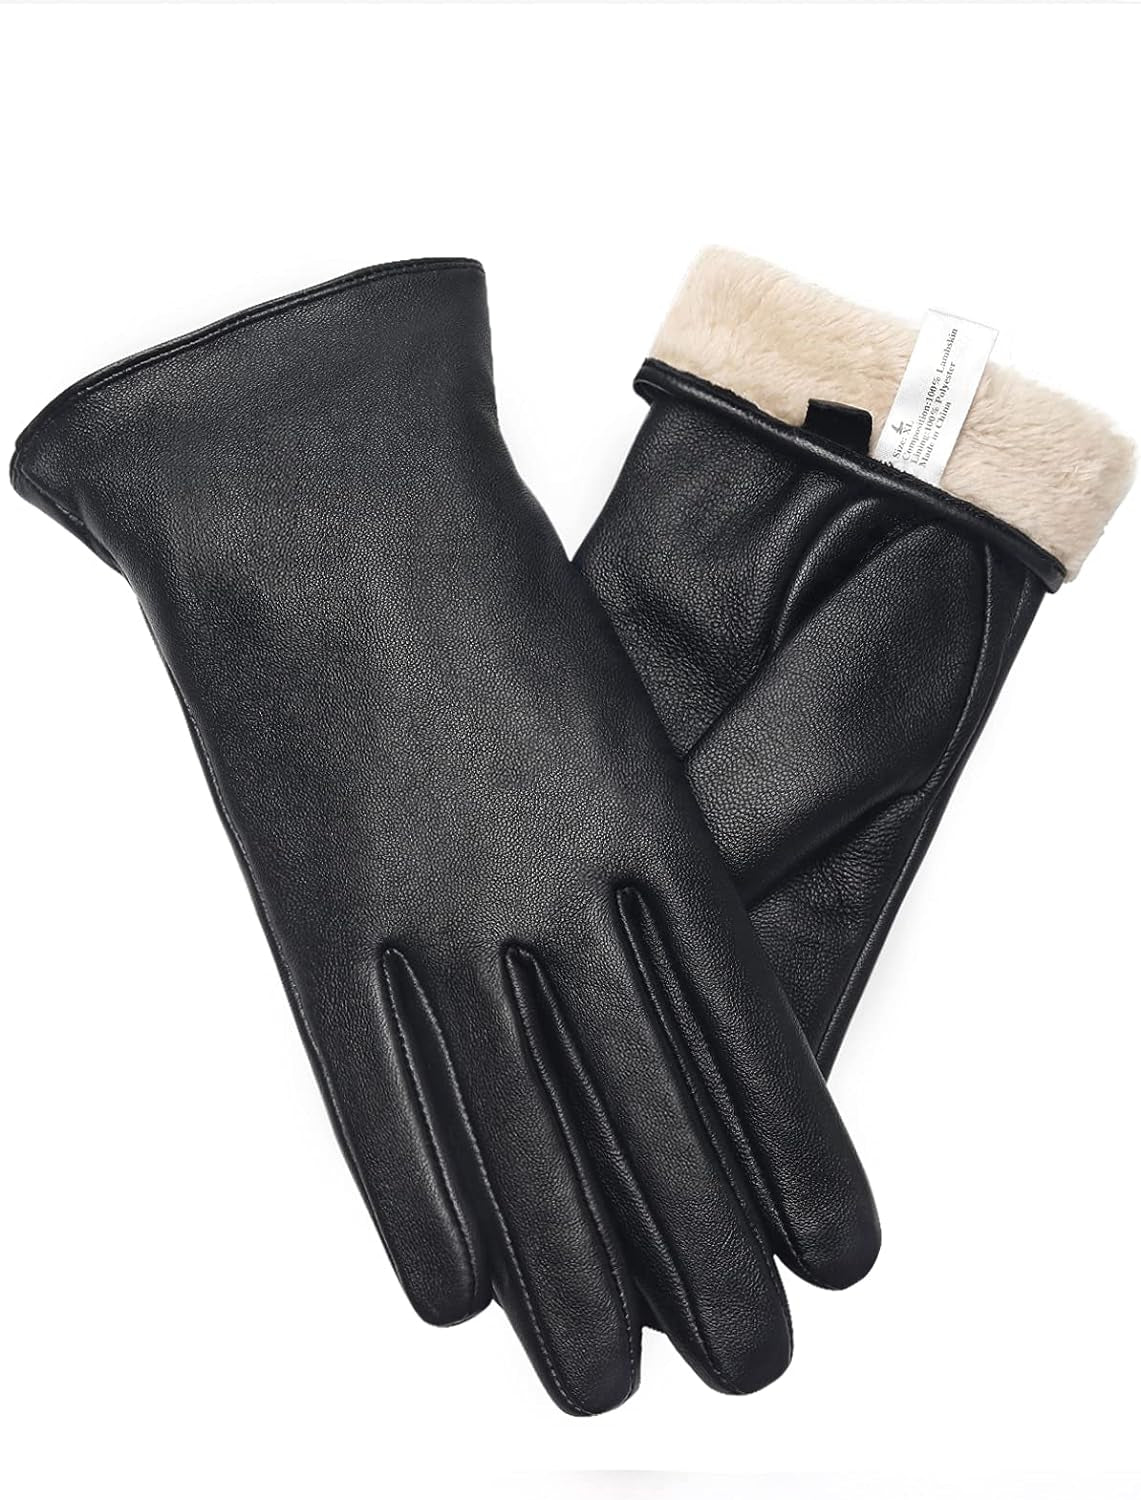 Full-Hand Womens Touch Screen Gloves Genuine Leather Gloves Warm Winter Texting Driving Glove